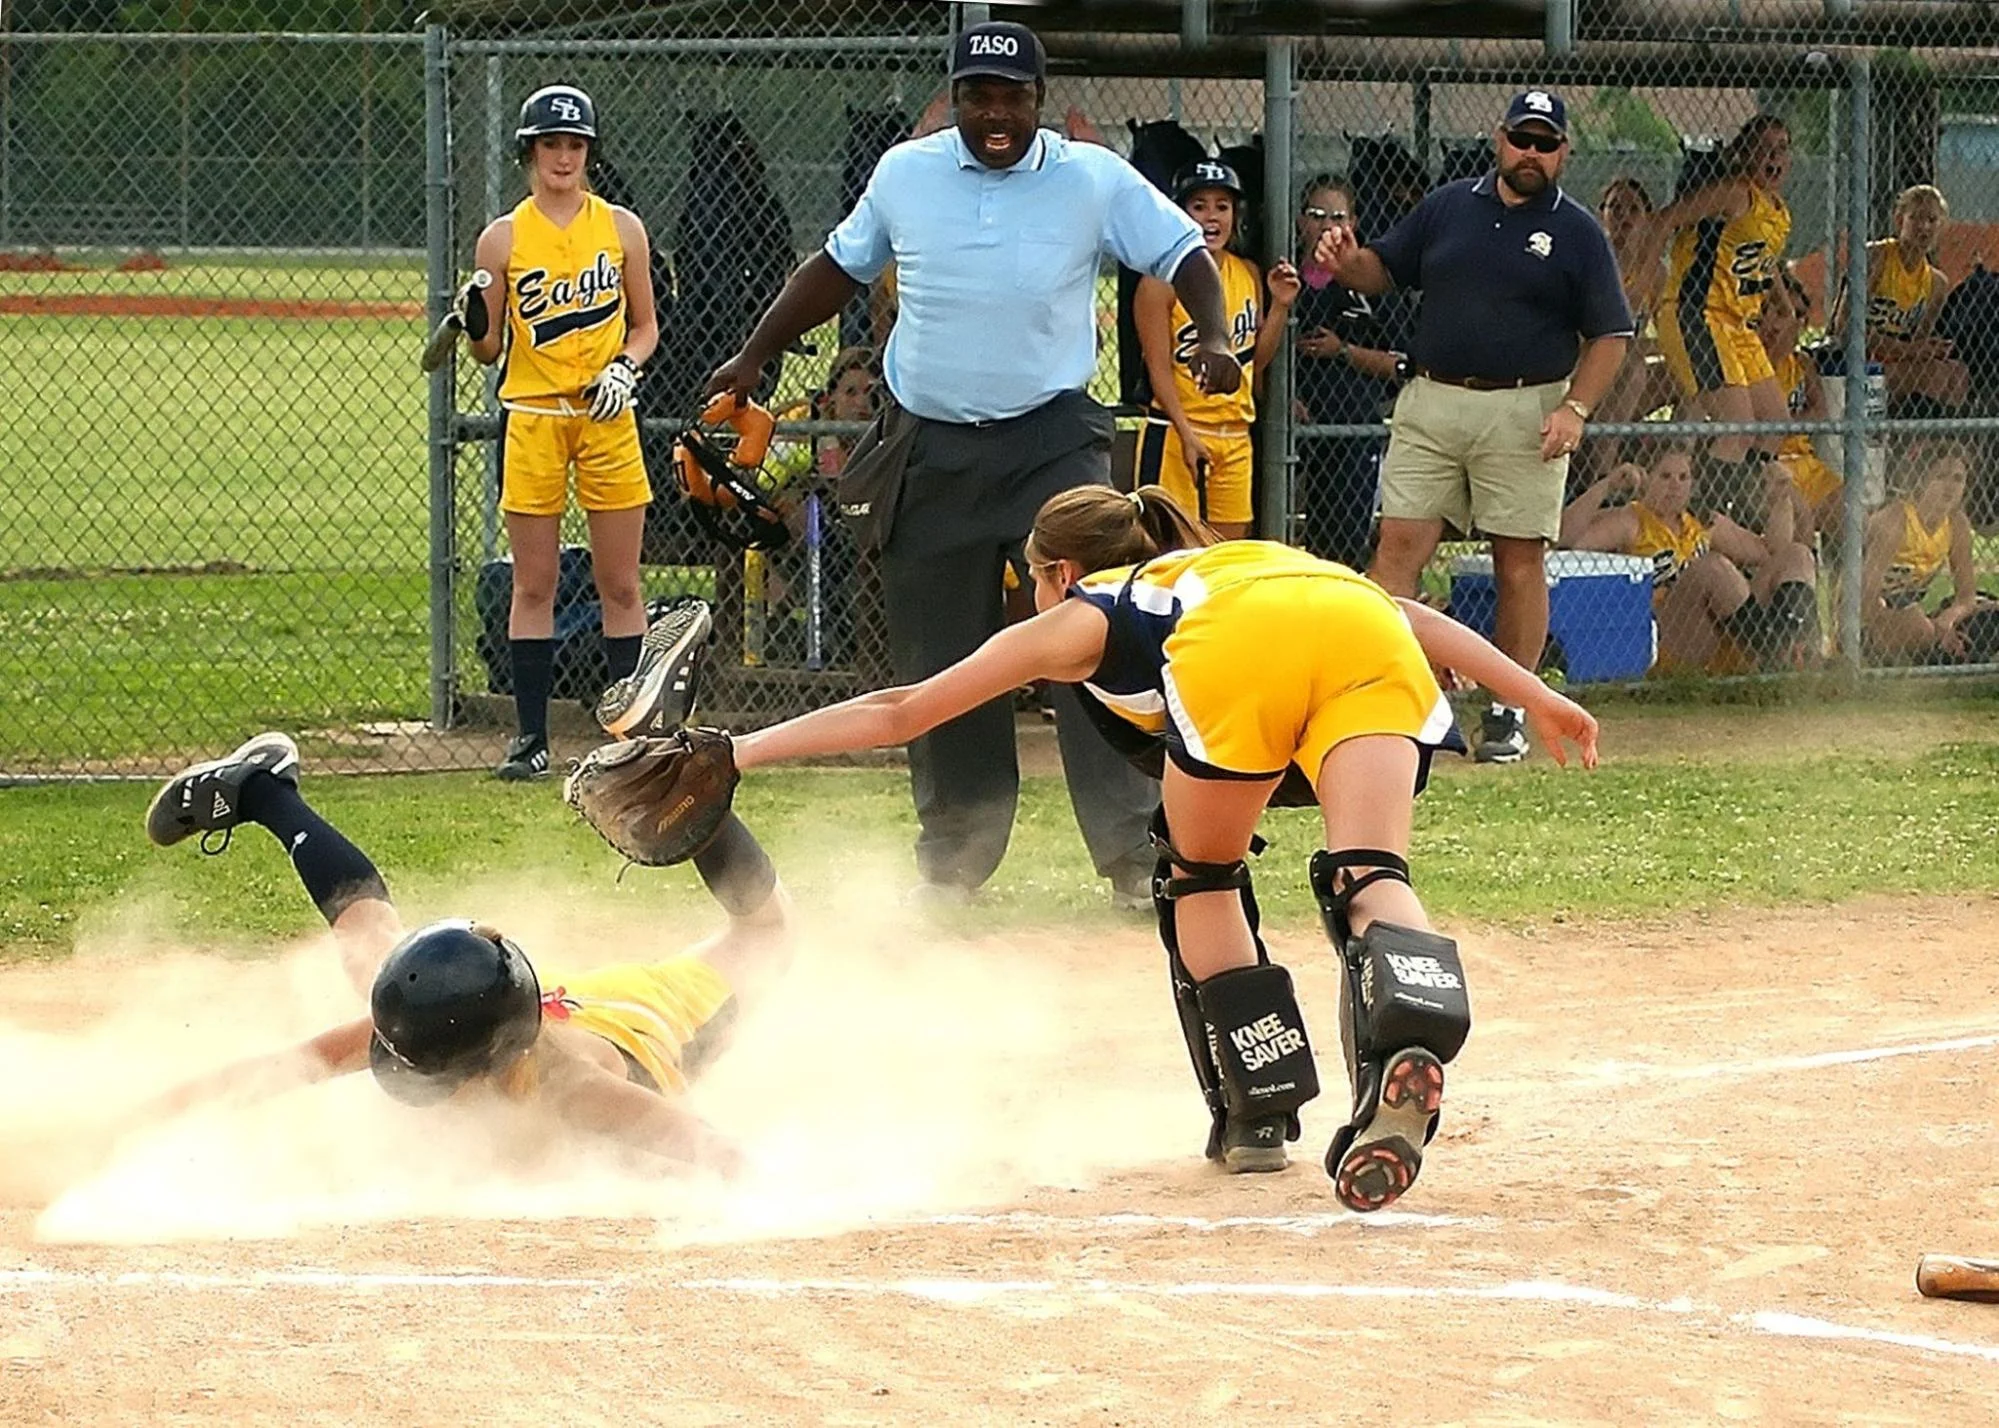 a youth softball play at the plate